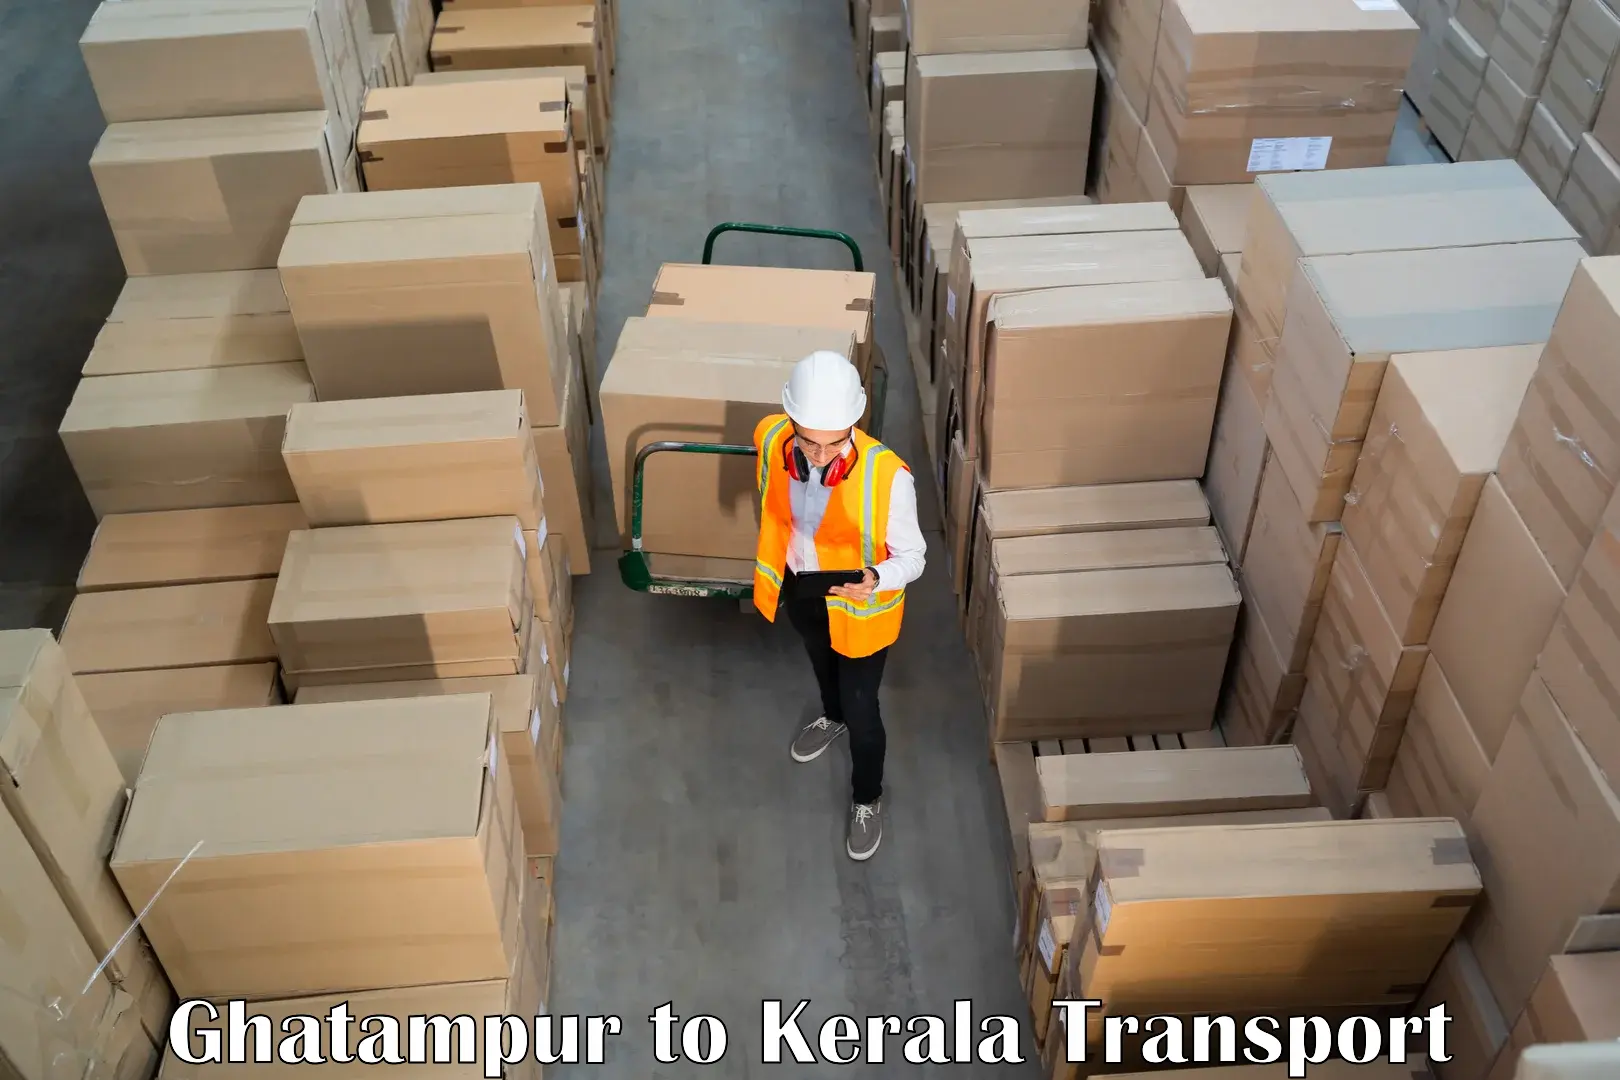 All India transport service Ghatampur to Cochin Port Kochi